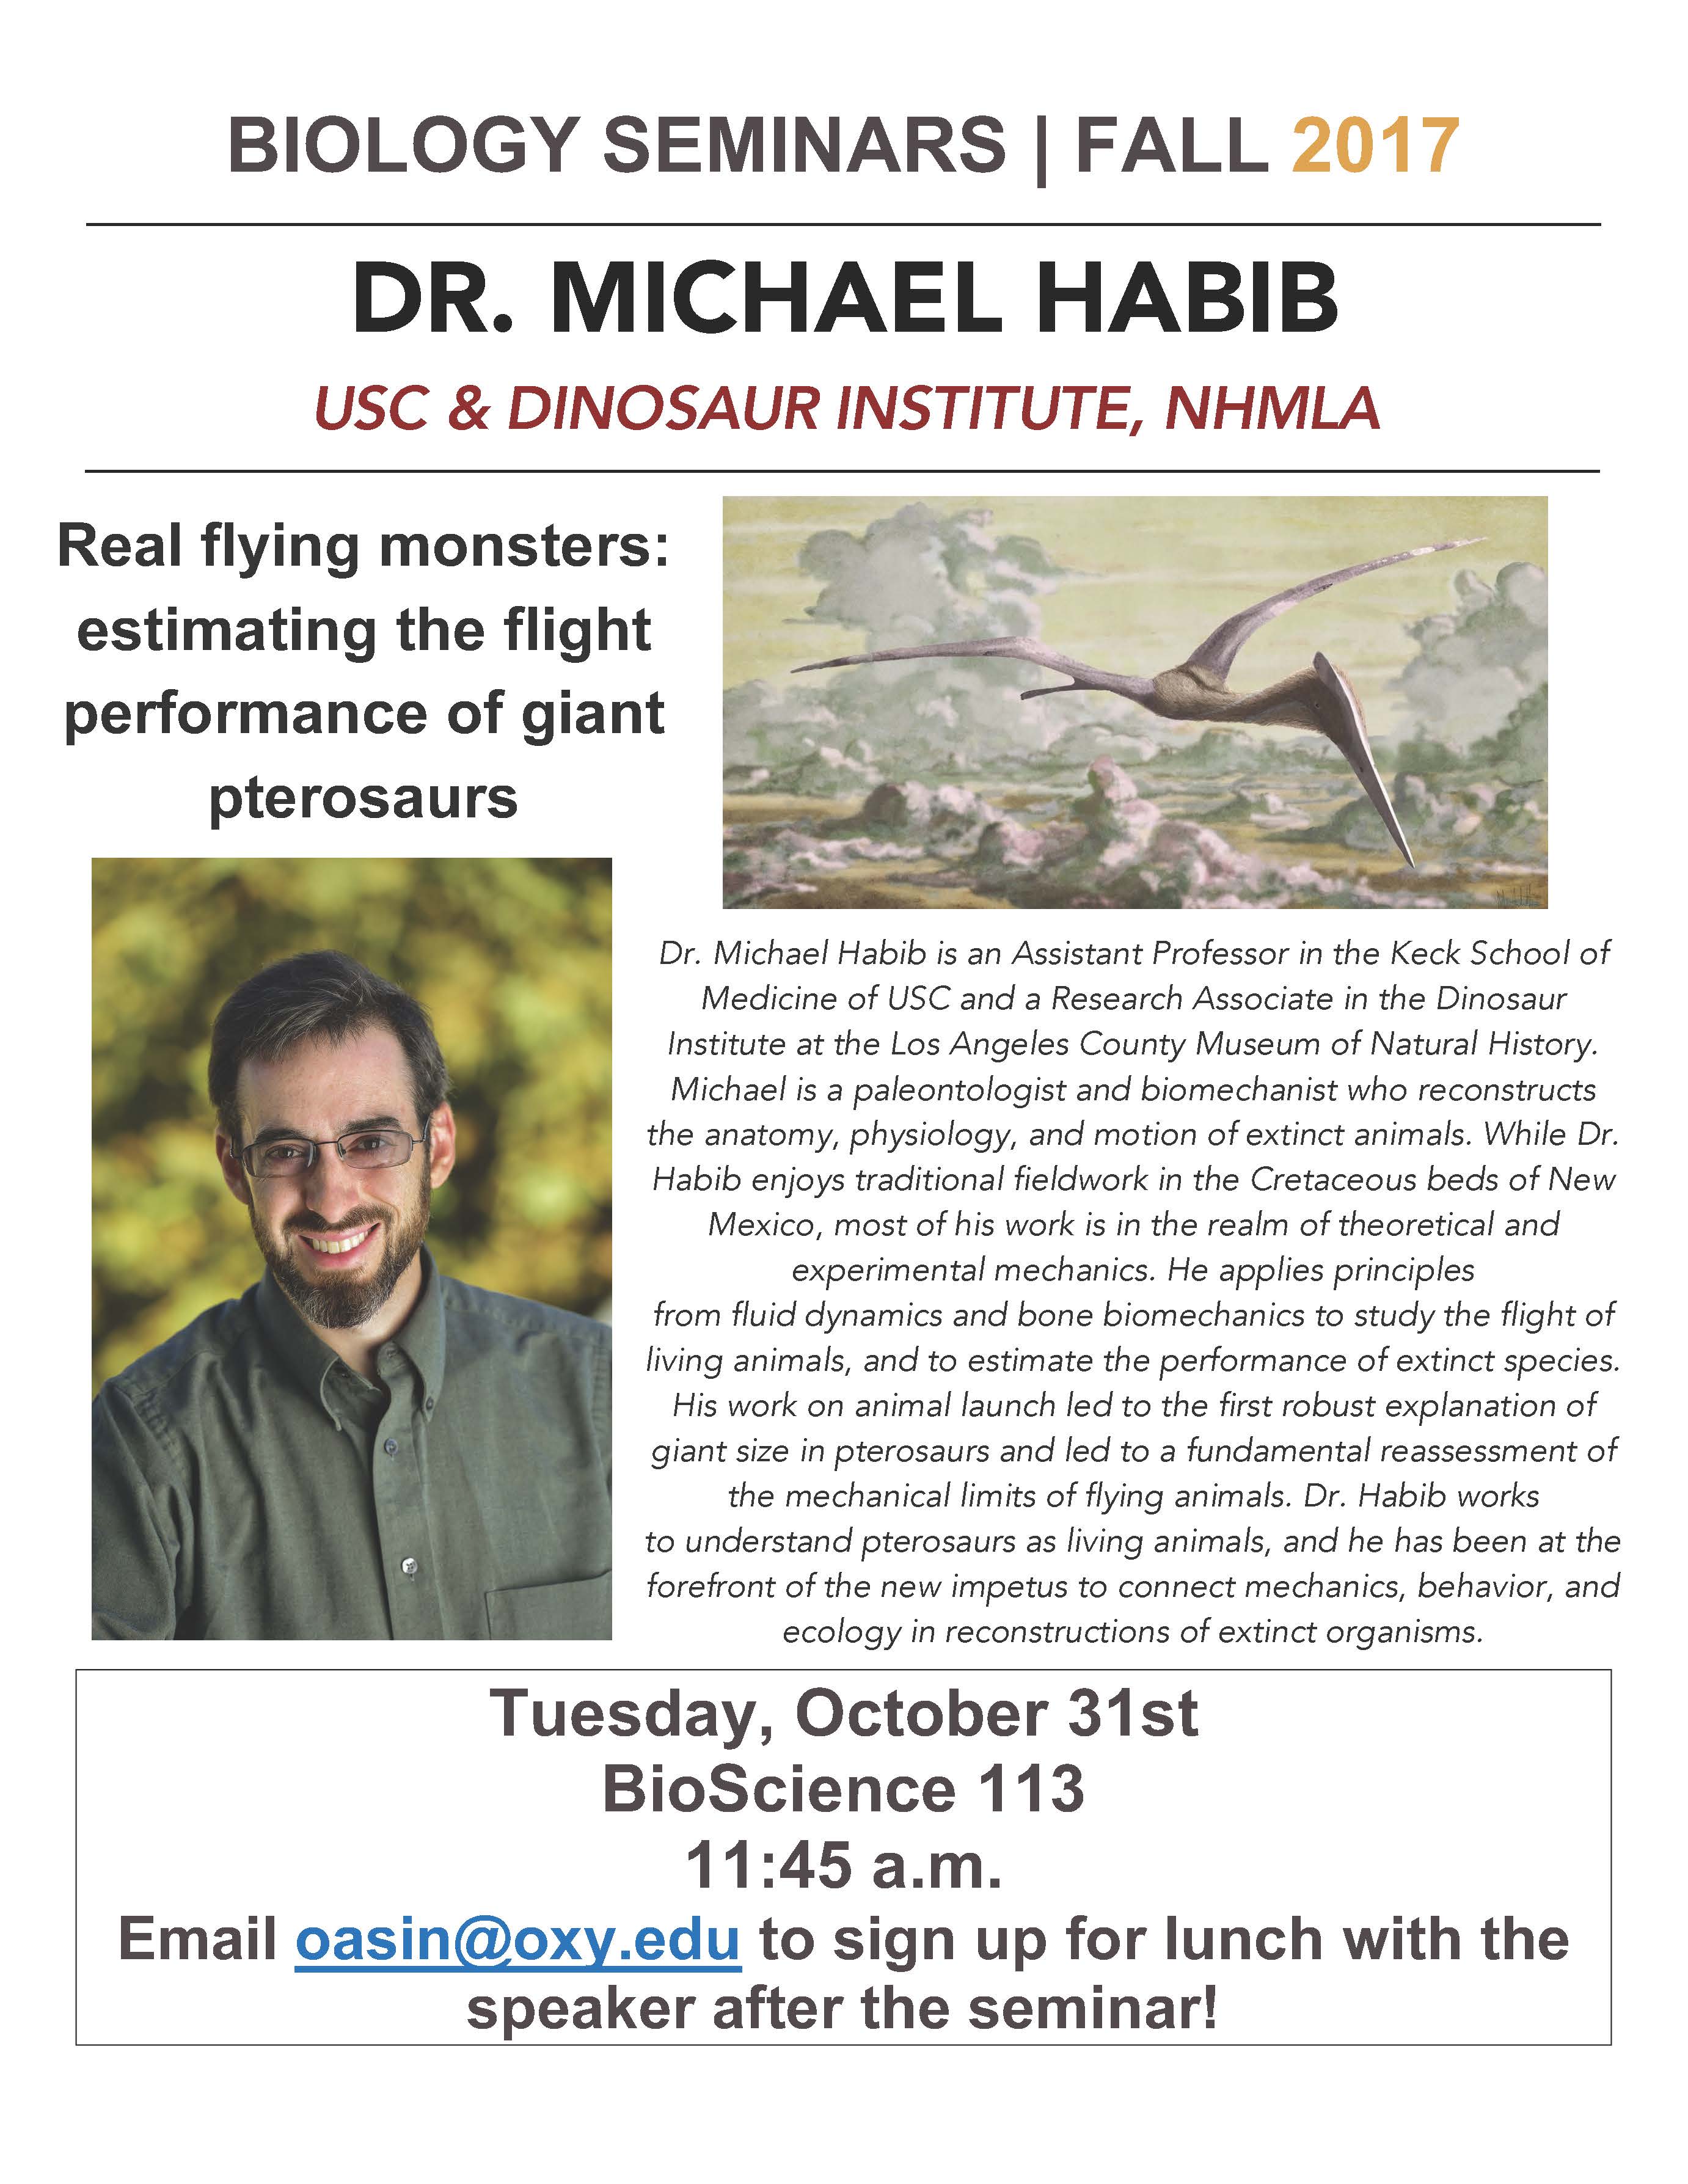 Image for Dr. Michael Habib - Real flying monsters: estimati